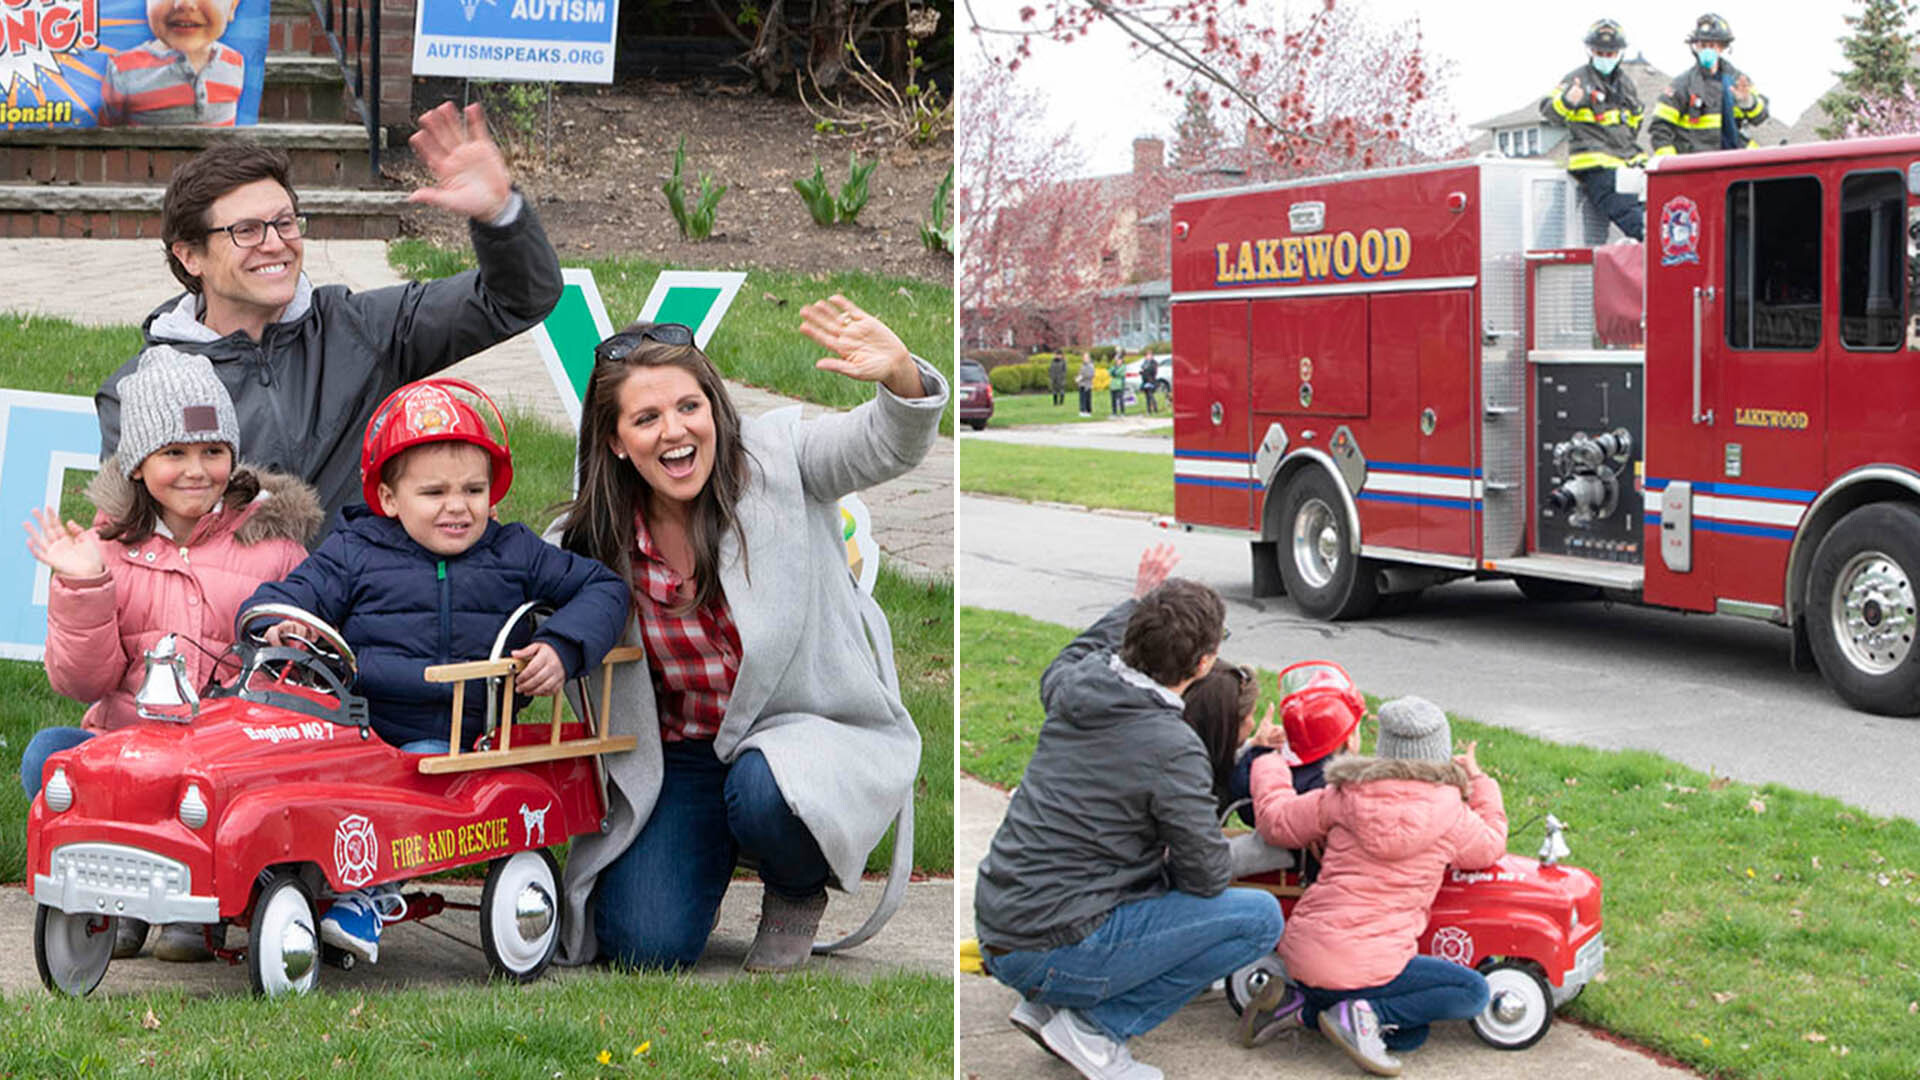 Simon celebrated his fifth birthday and end of chemo treatment with a fire truck parade. 